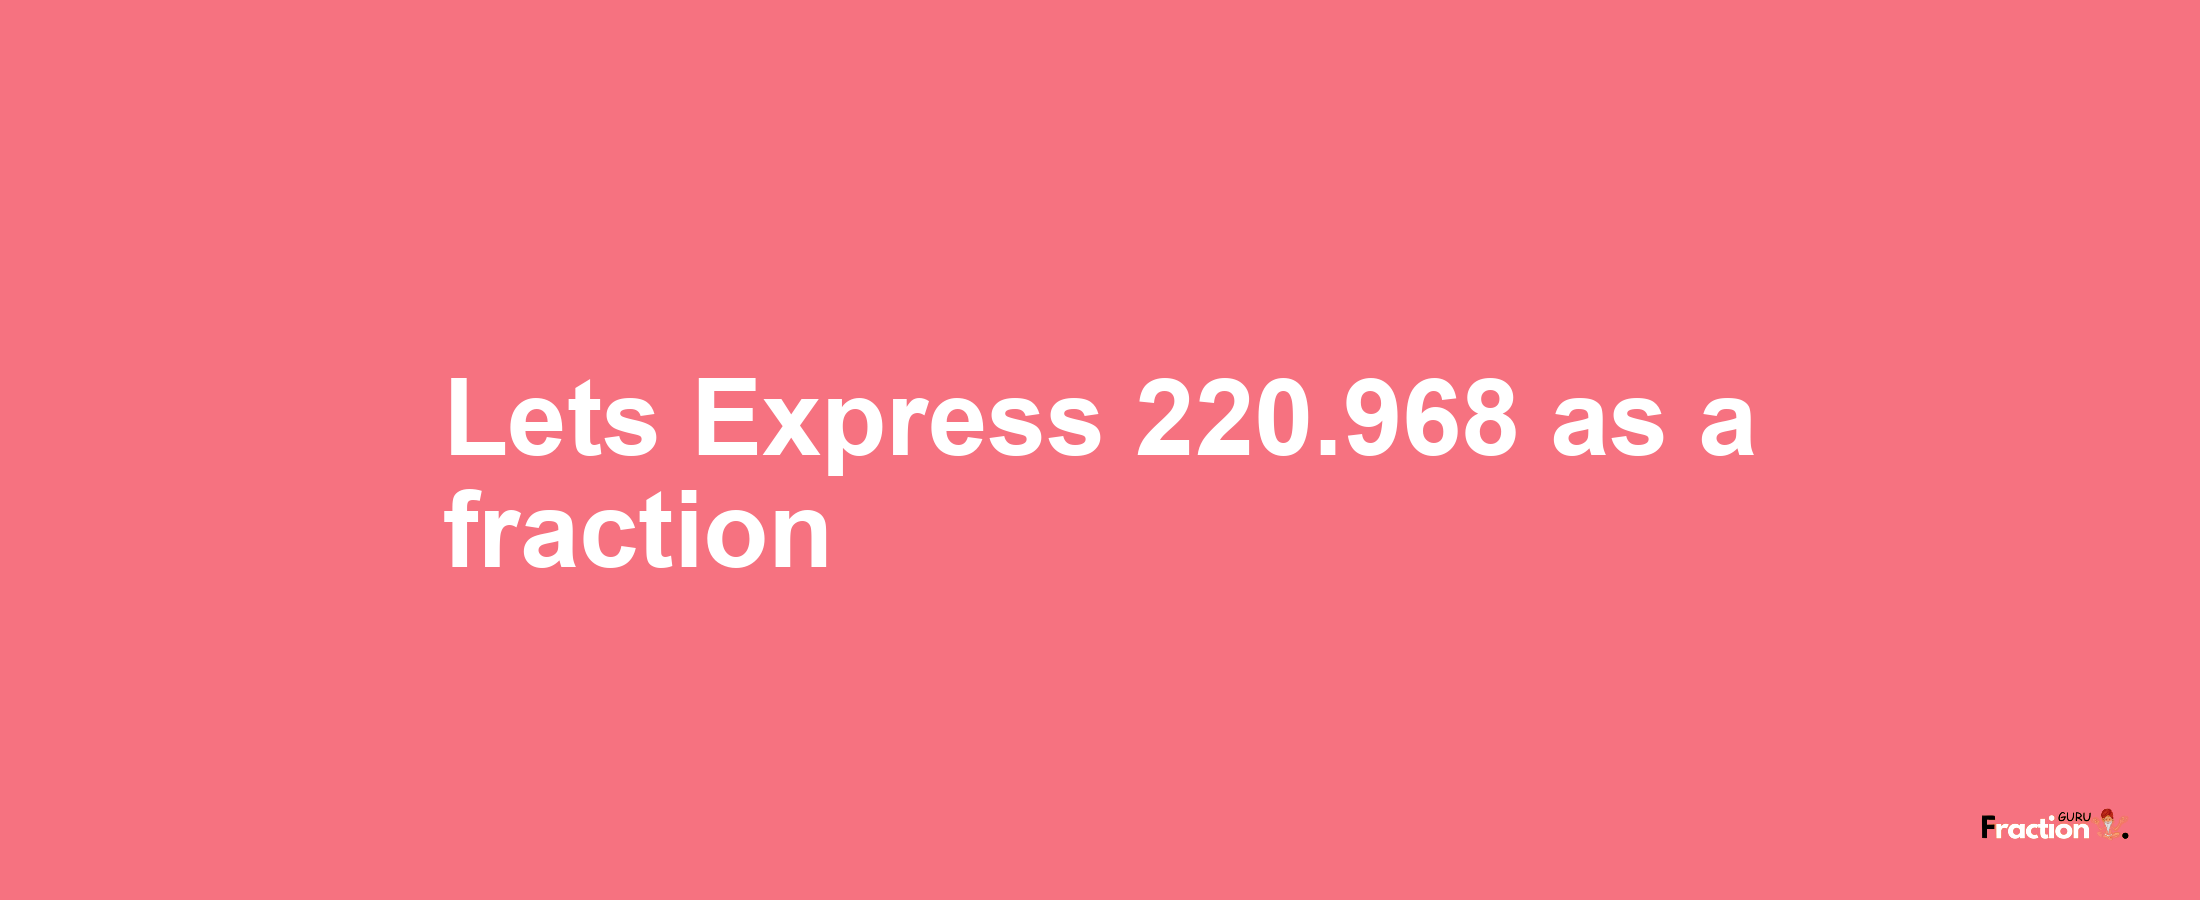 Lets Express 220.968 as afraction